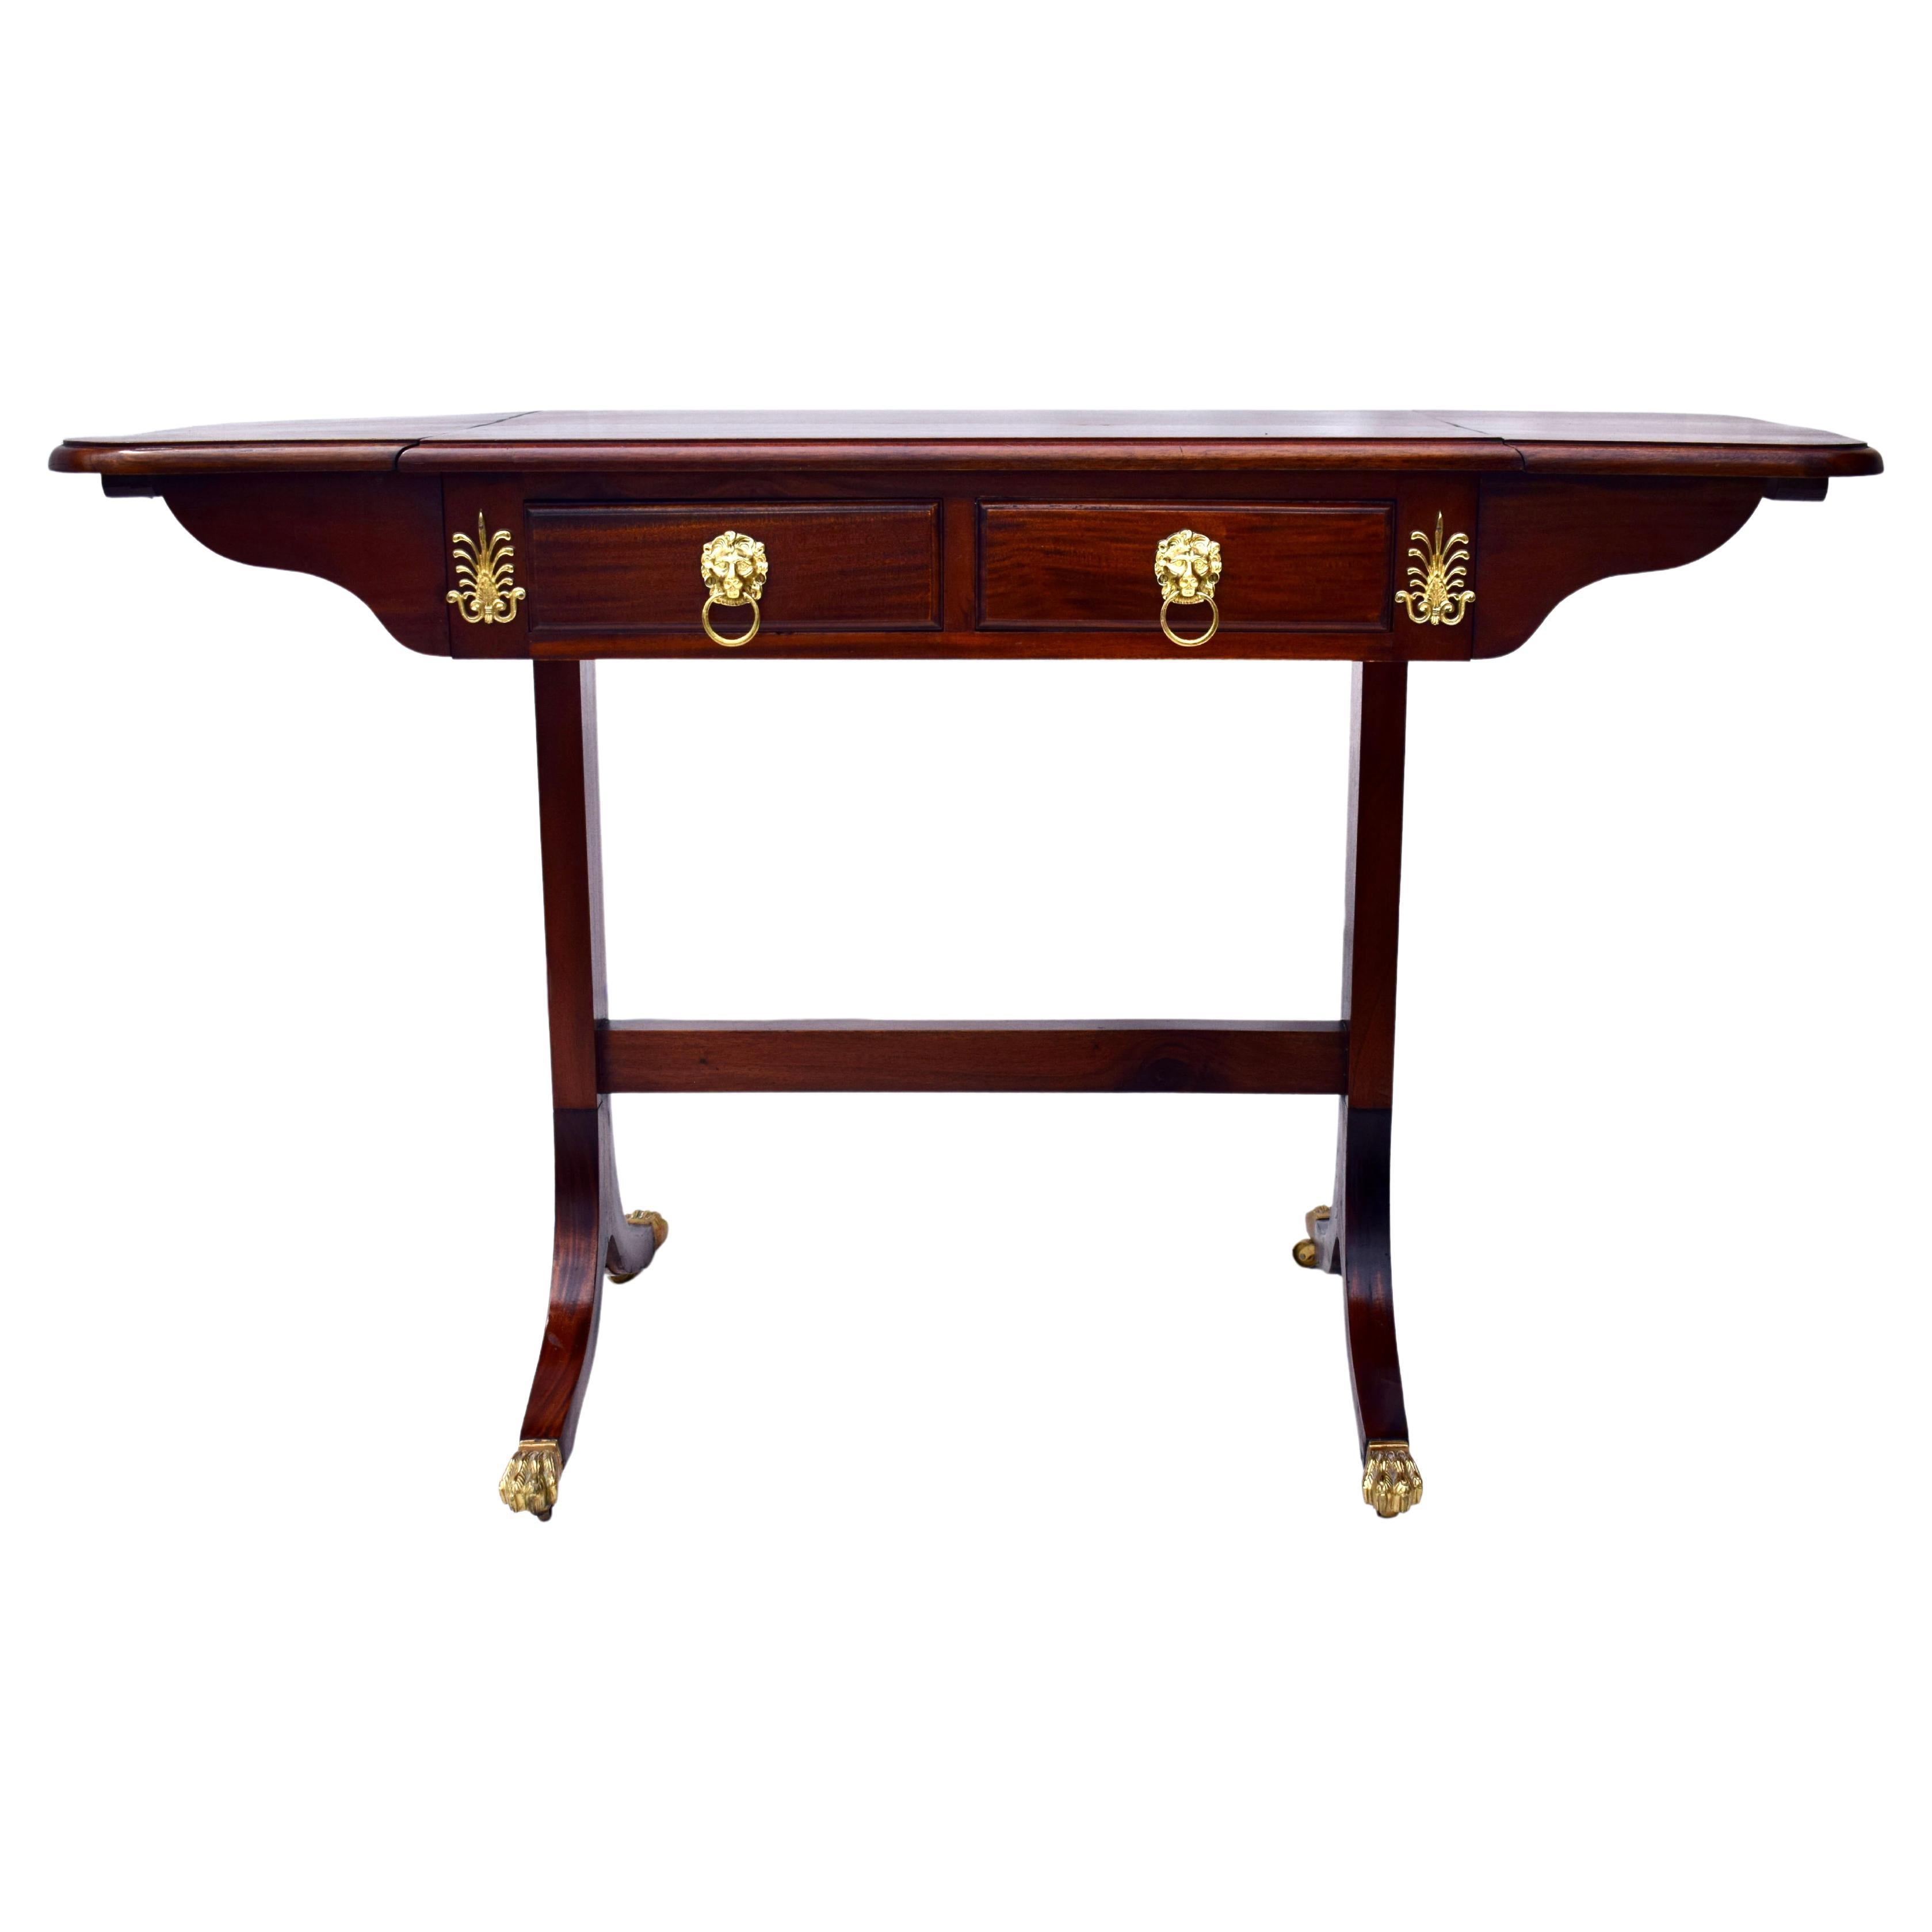 English Mahogany Drop-Leaf Sofa Table with Lion Paw Brass Casters